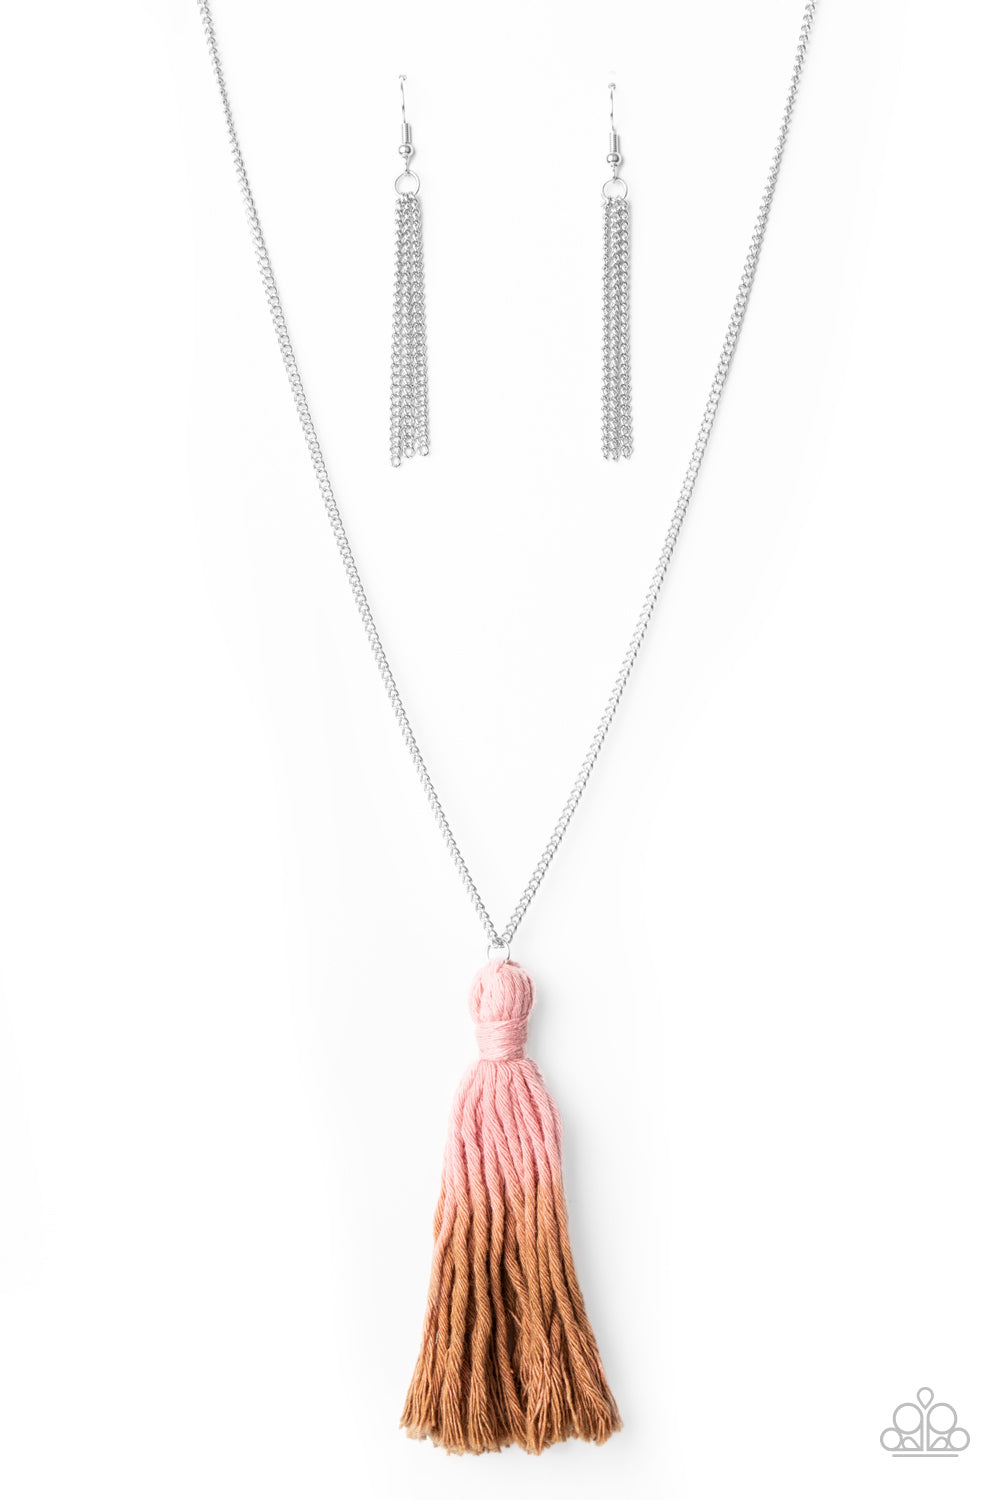 Paparazzi Accessories Totally Tasseled - Pink Necklaces - Lady T Accessories